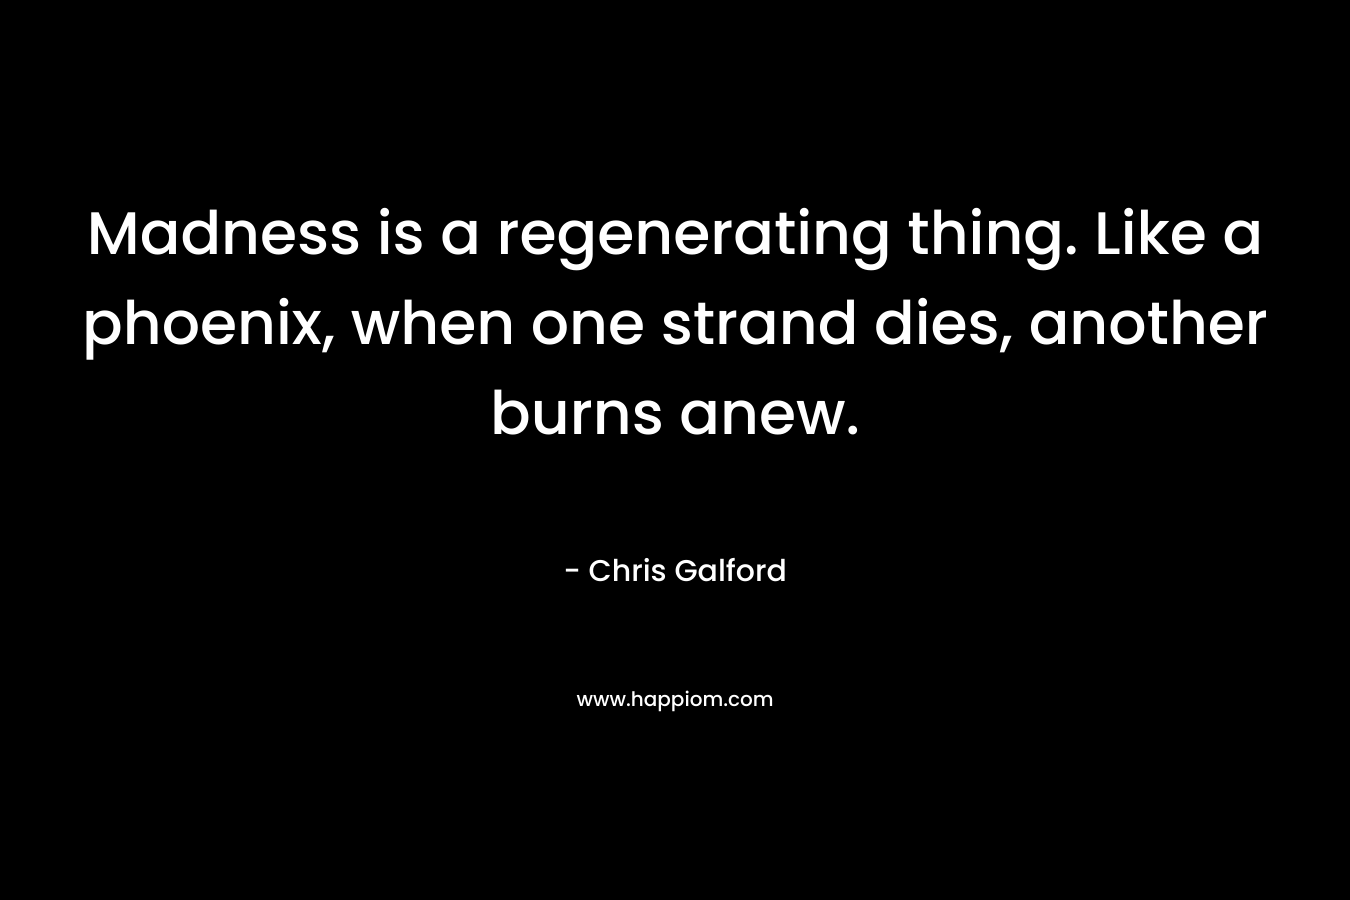 Madness is a regenerating thing. Like a phoenix, when one strand dies, another burns anew.